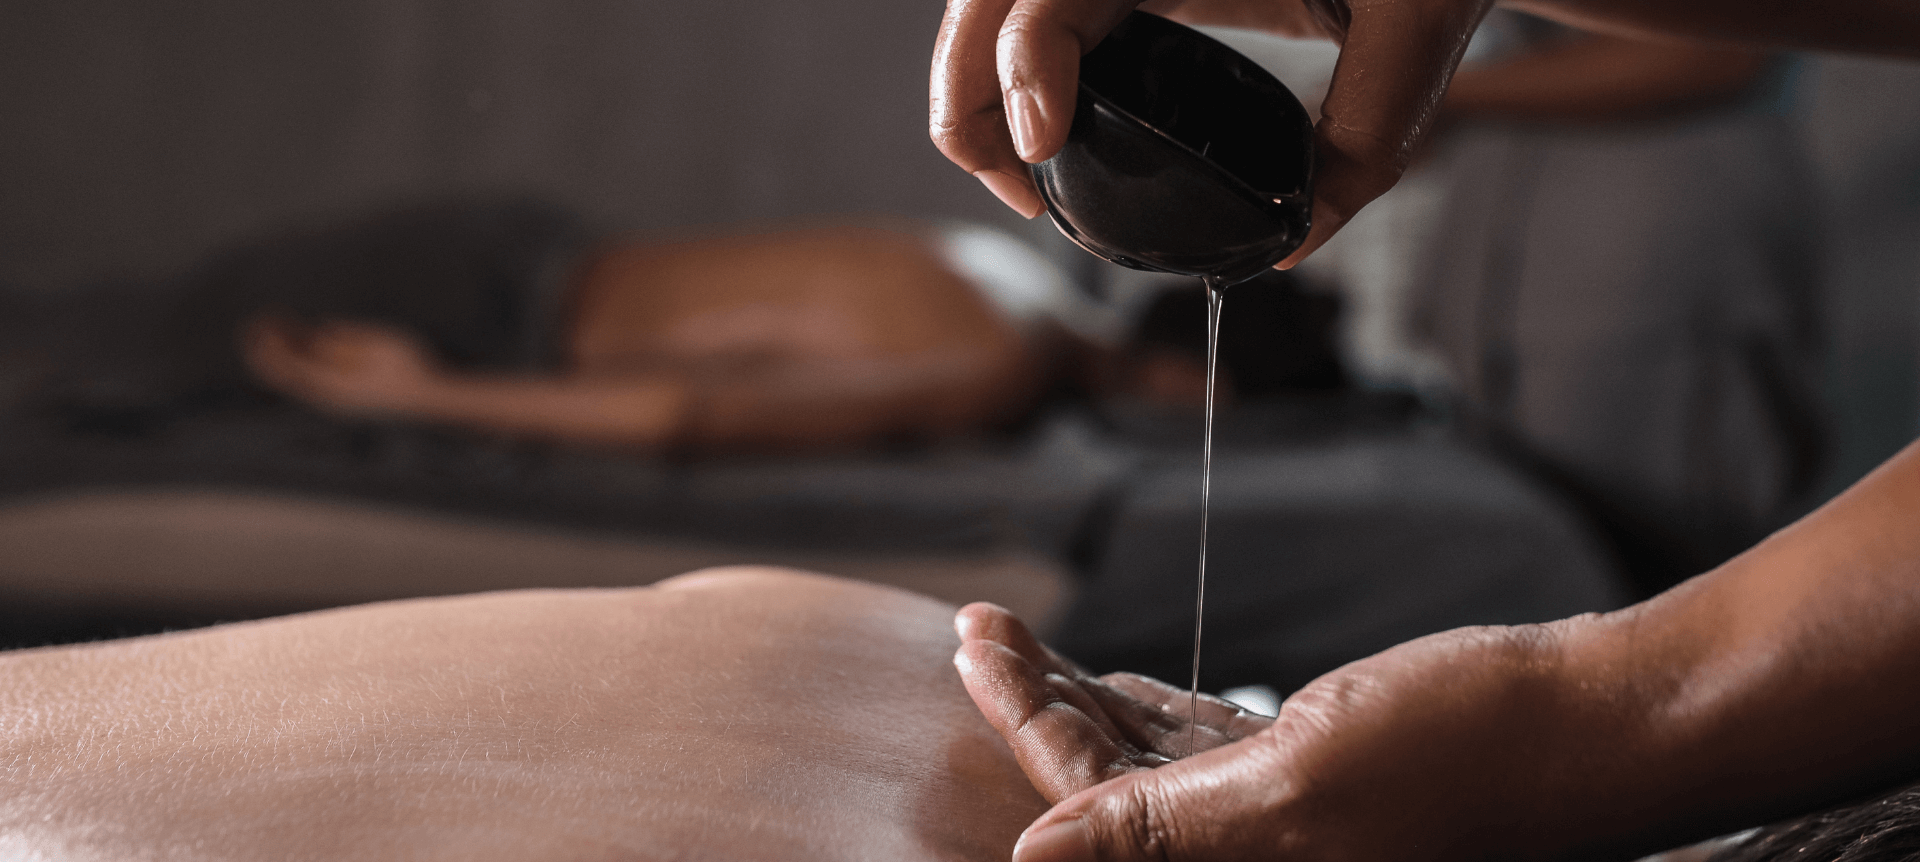 Person pouring oil on their hand to give a massage